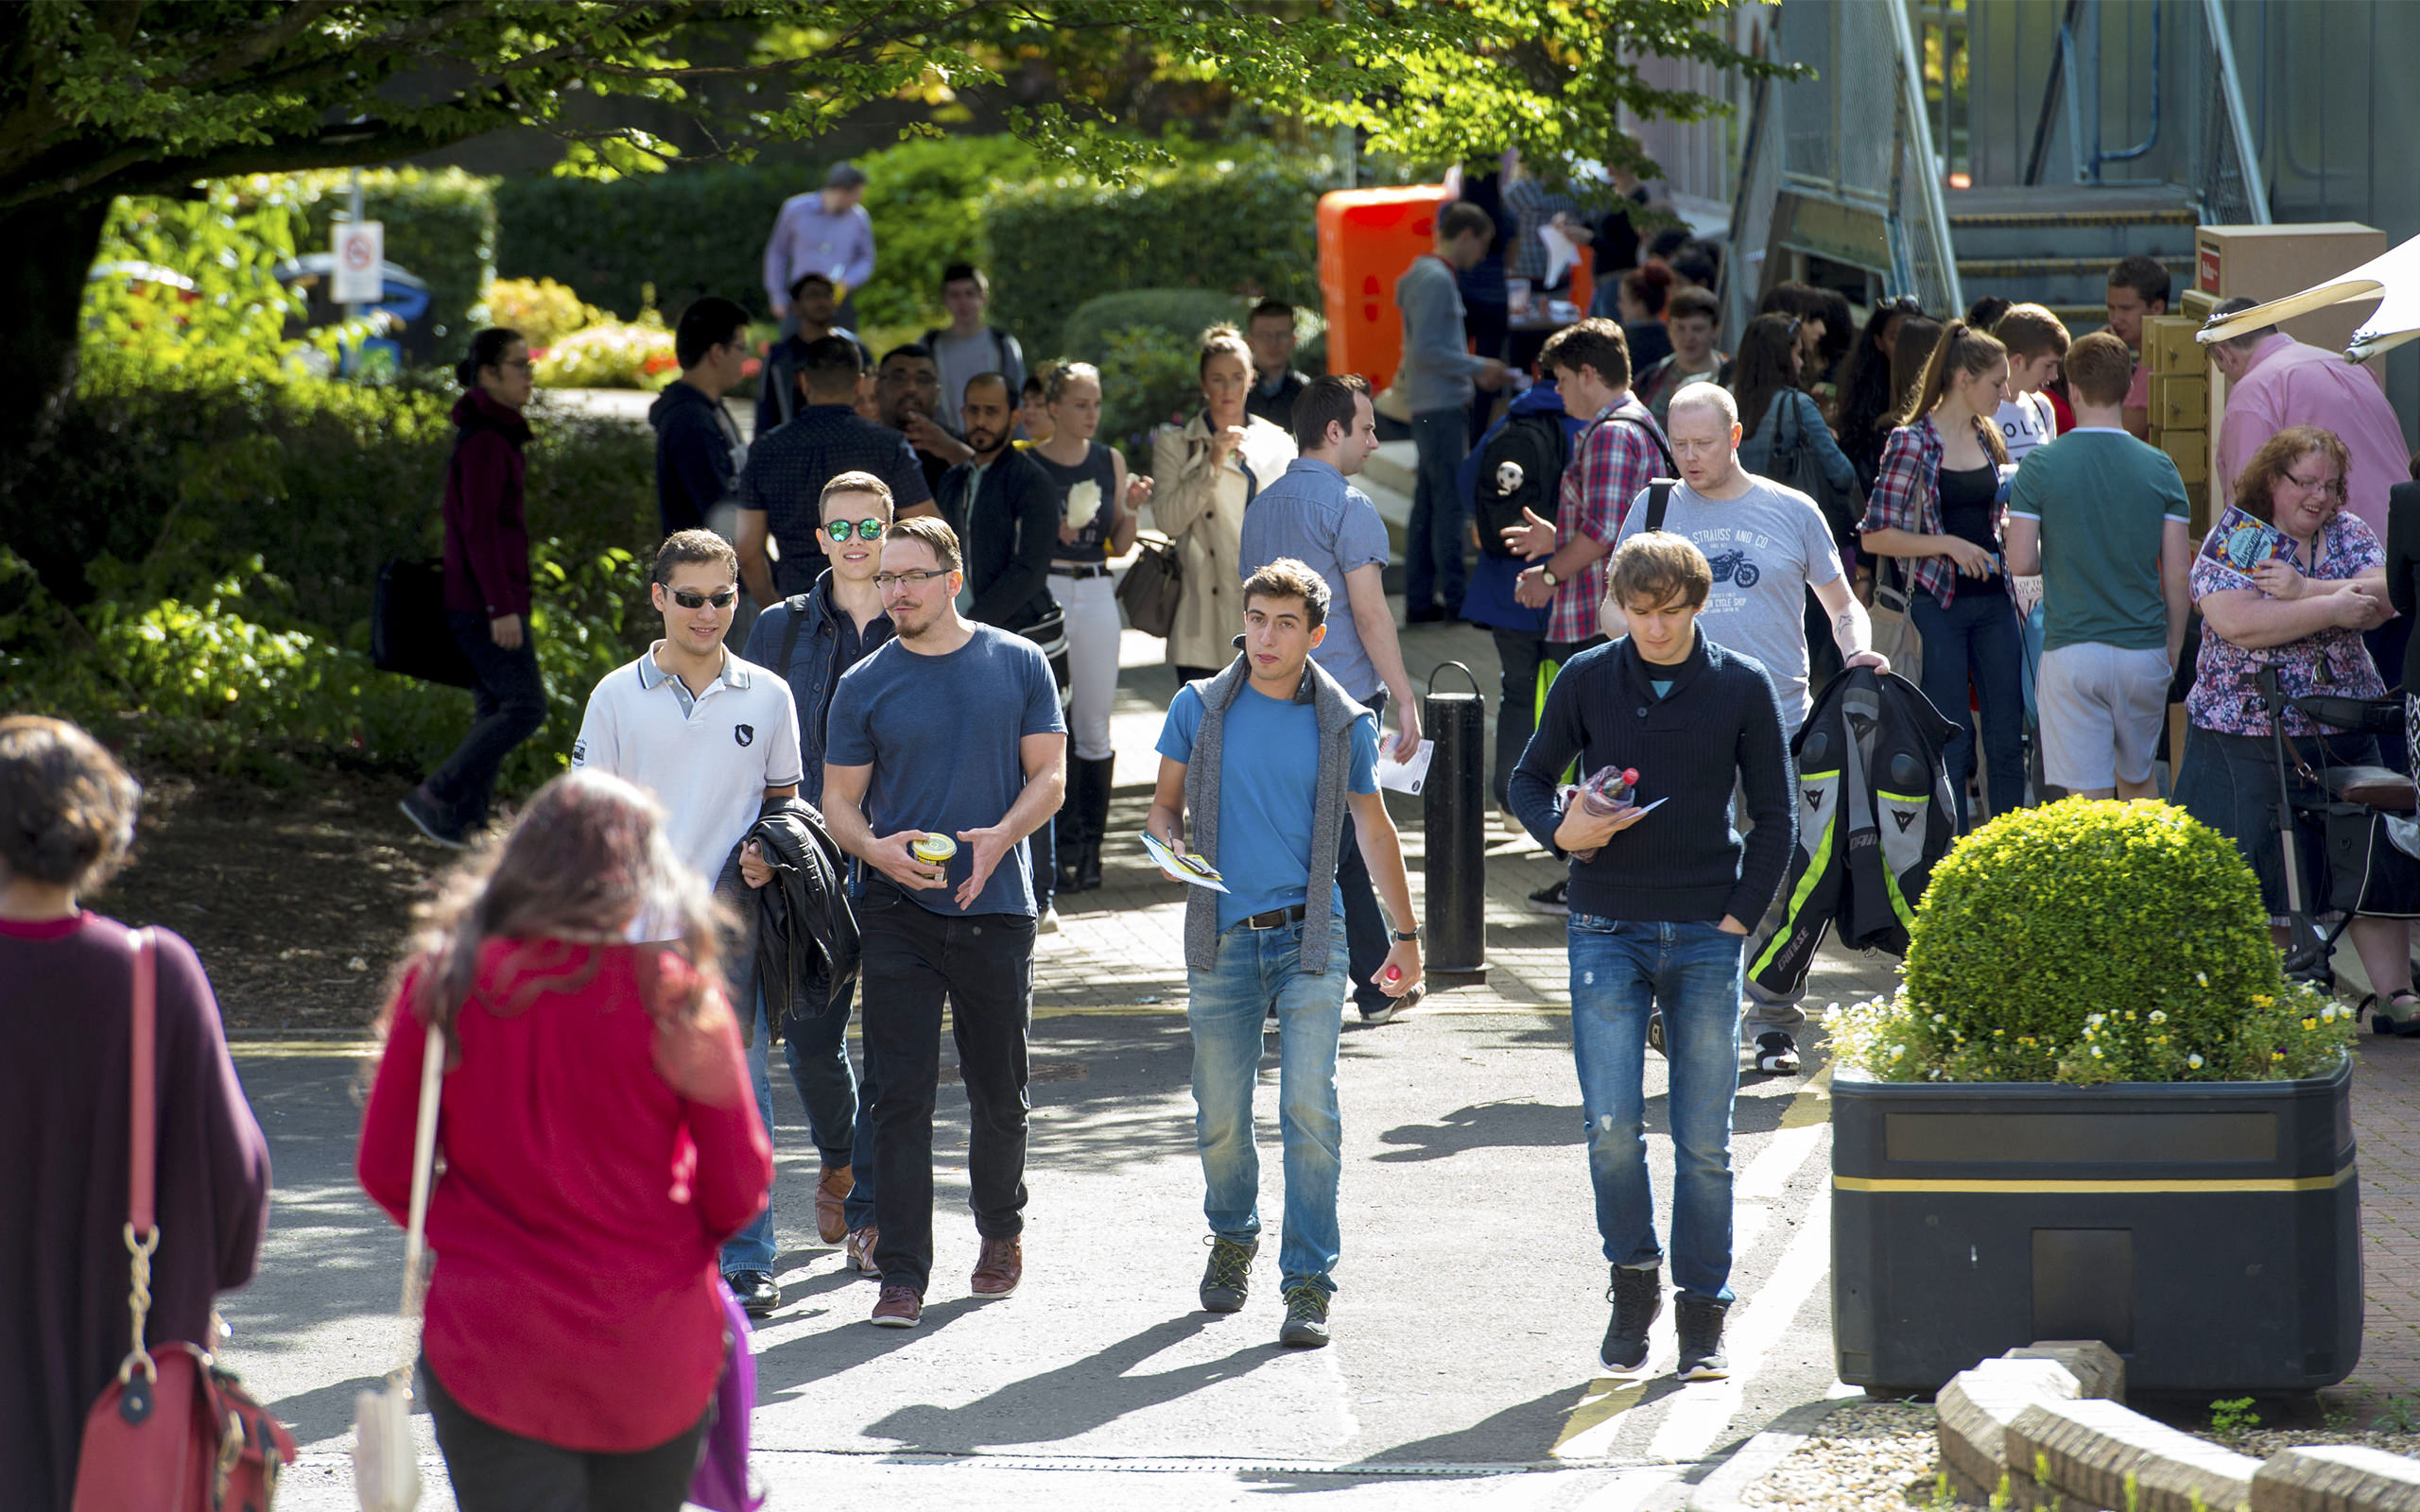 Prospective Students Visiting UWS Open Days | University of the West of Scotland